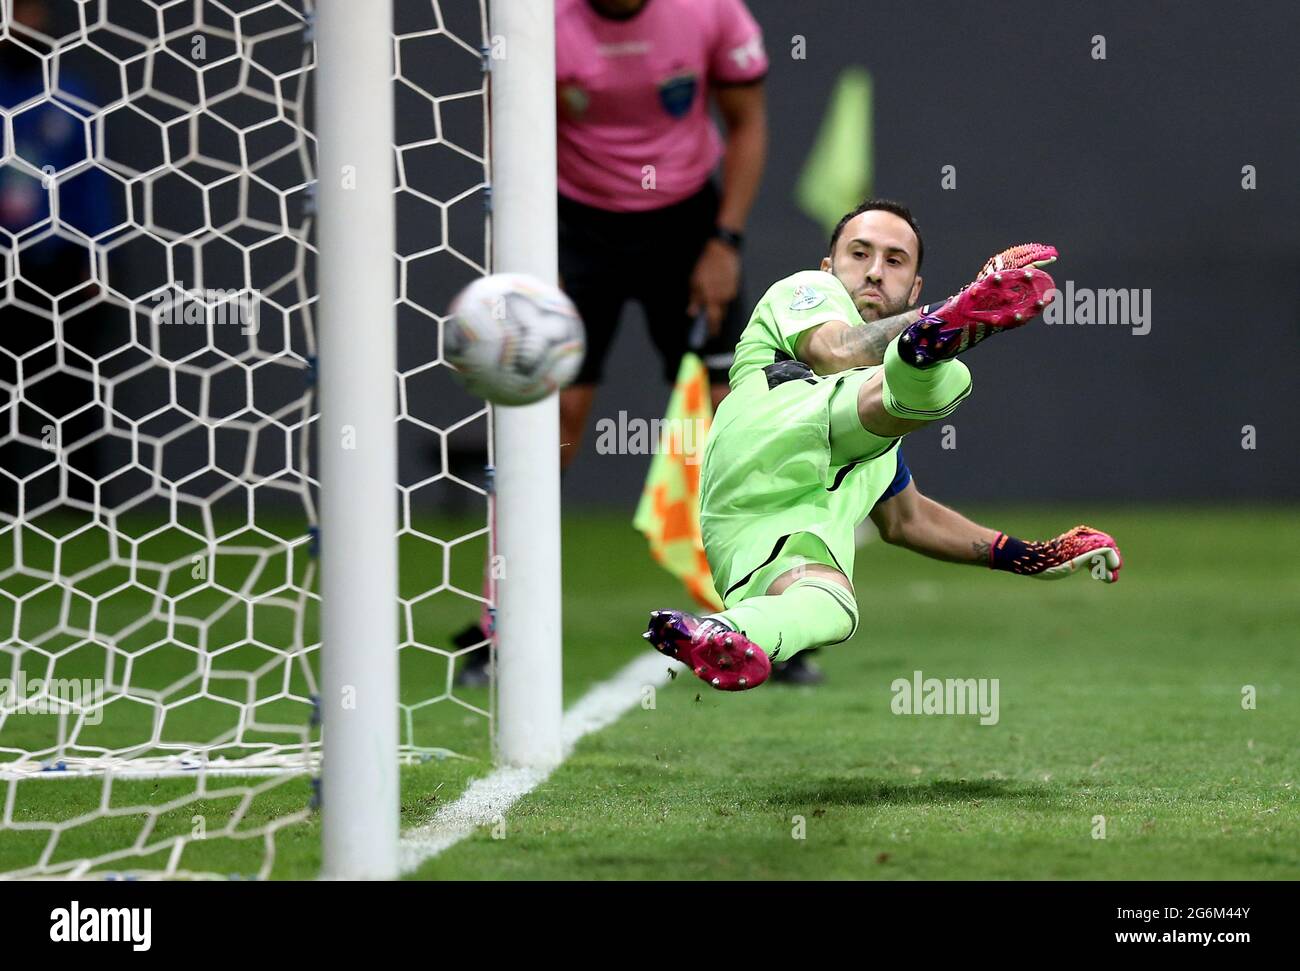 BRASILIA, BRAZIL - JULY 06: David Ospina Goalkeeper of Colombia dives during a penalty shootout ,after a the Semifinal match between Argentina and Colombia as part of Conmebol Copa America Brazil 2021 at Mane Garrincha Stadium on July 6, 2021 in Brasilia, Brazil. (MB Media) Stock Photo